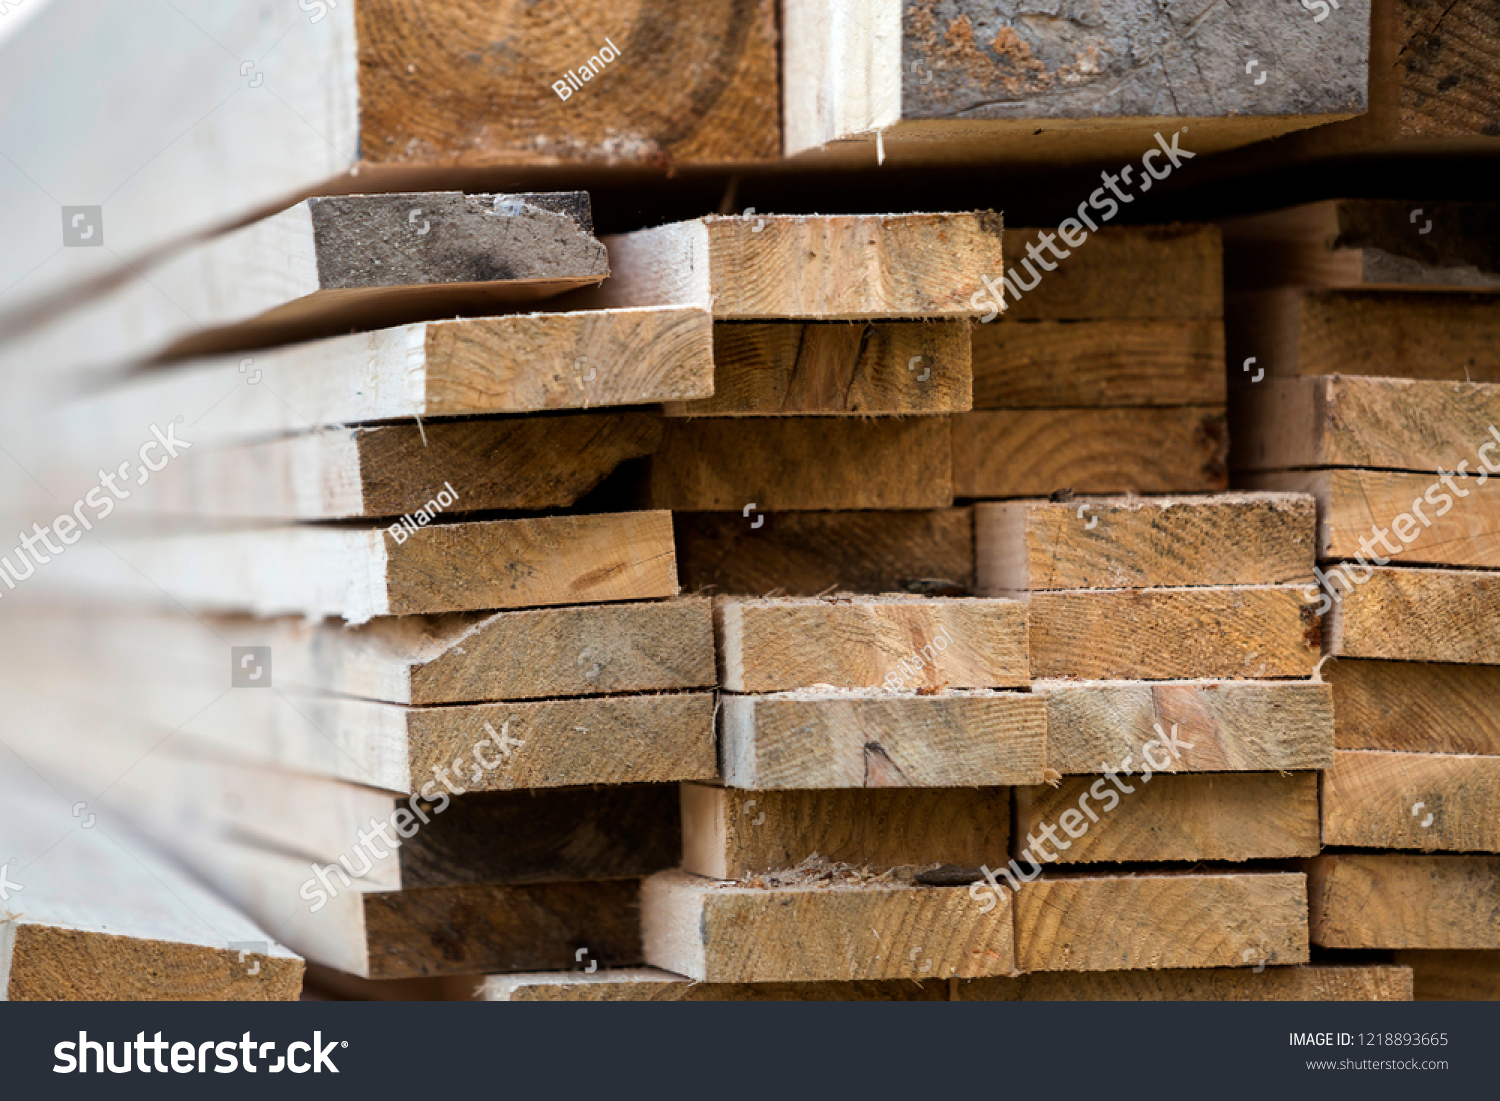 Stack of natural brown uneven rough wooden boards different size, cross-sectional view. Industrial timber for carpentry, building, repairing and furniture, lumber material for construction. #1218893665